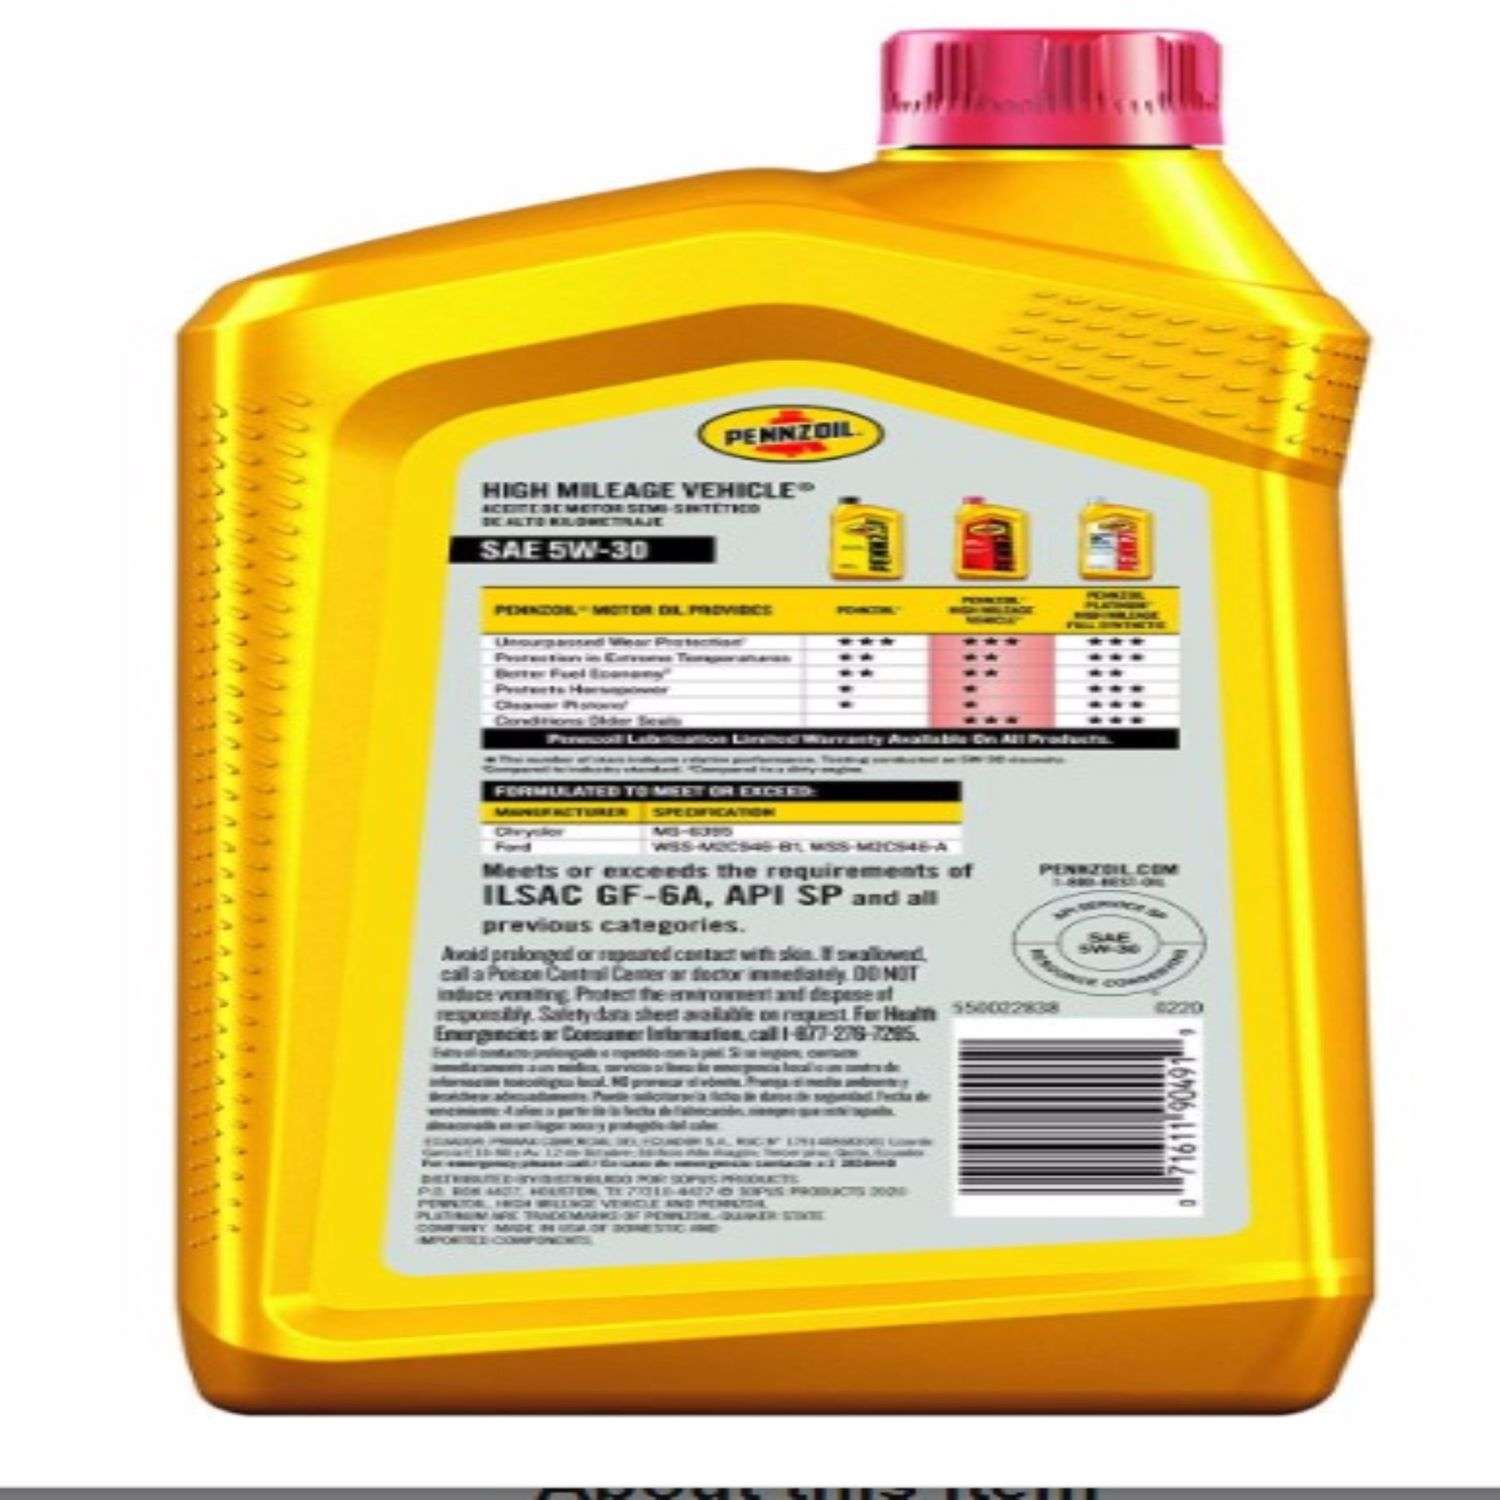 Aceite para motor 5w30 full synthetic pennzoil